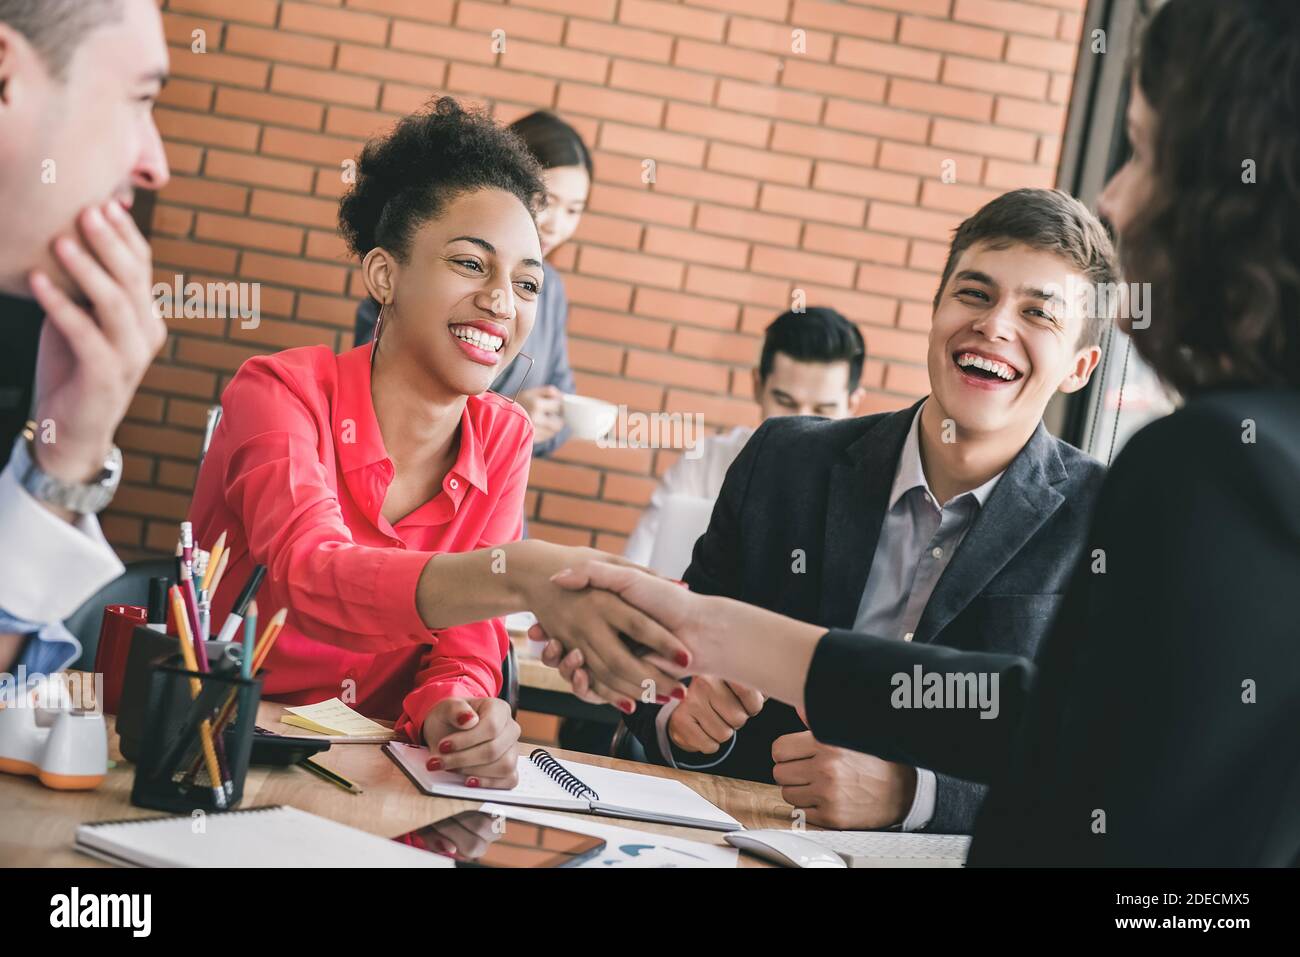 Smiling happy black businesswoman shaking hands with partner at office meeting offering congratulations on successful business deal Stock Photo